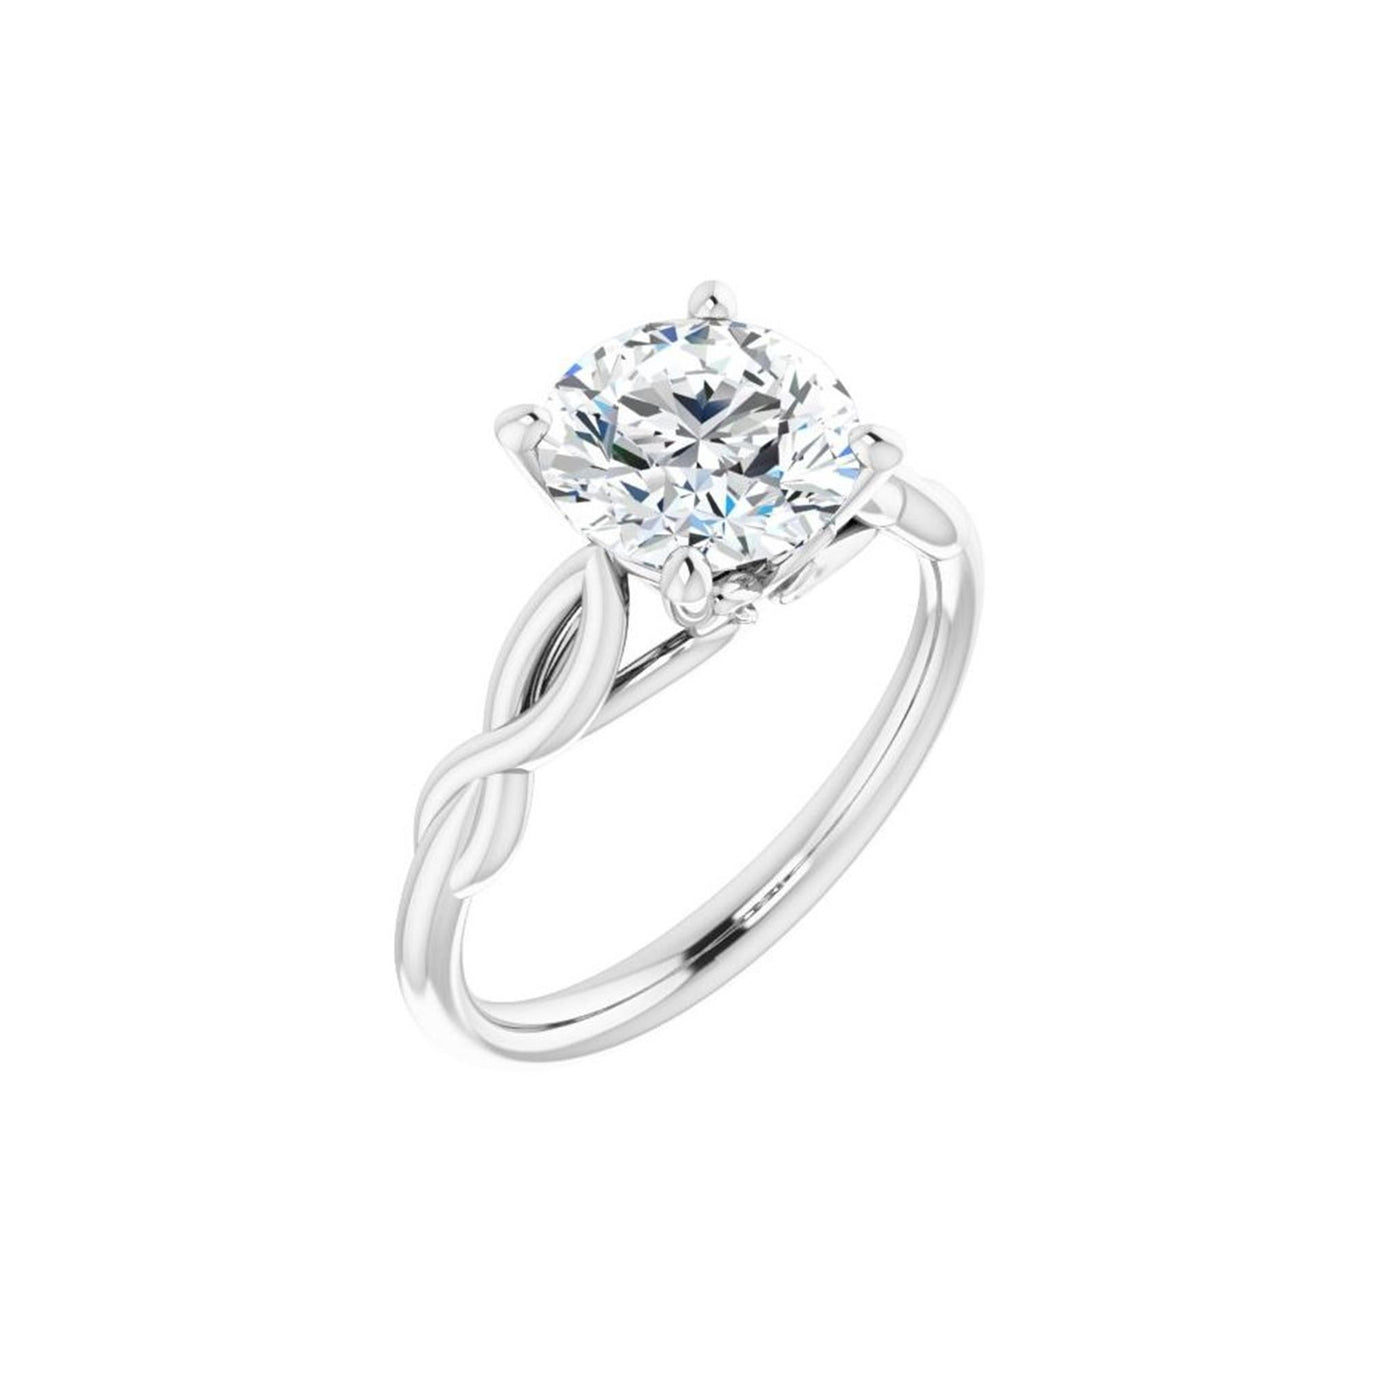 Ever & Ever 14K White Gold 4 Prong Style Diamond Solitaire Engagement Ring